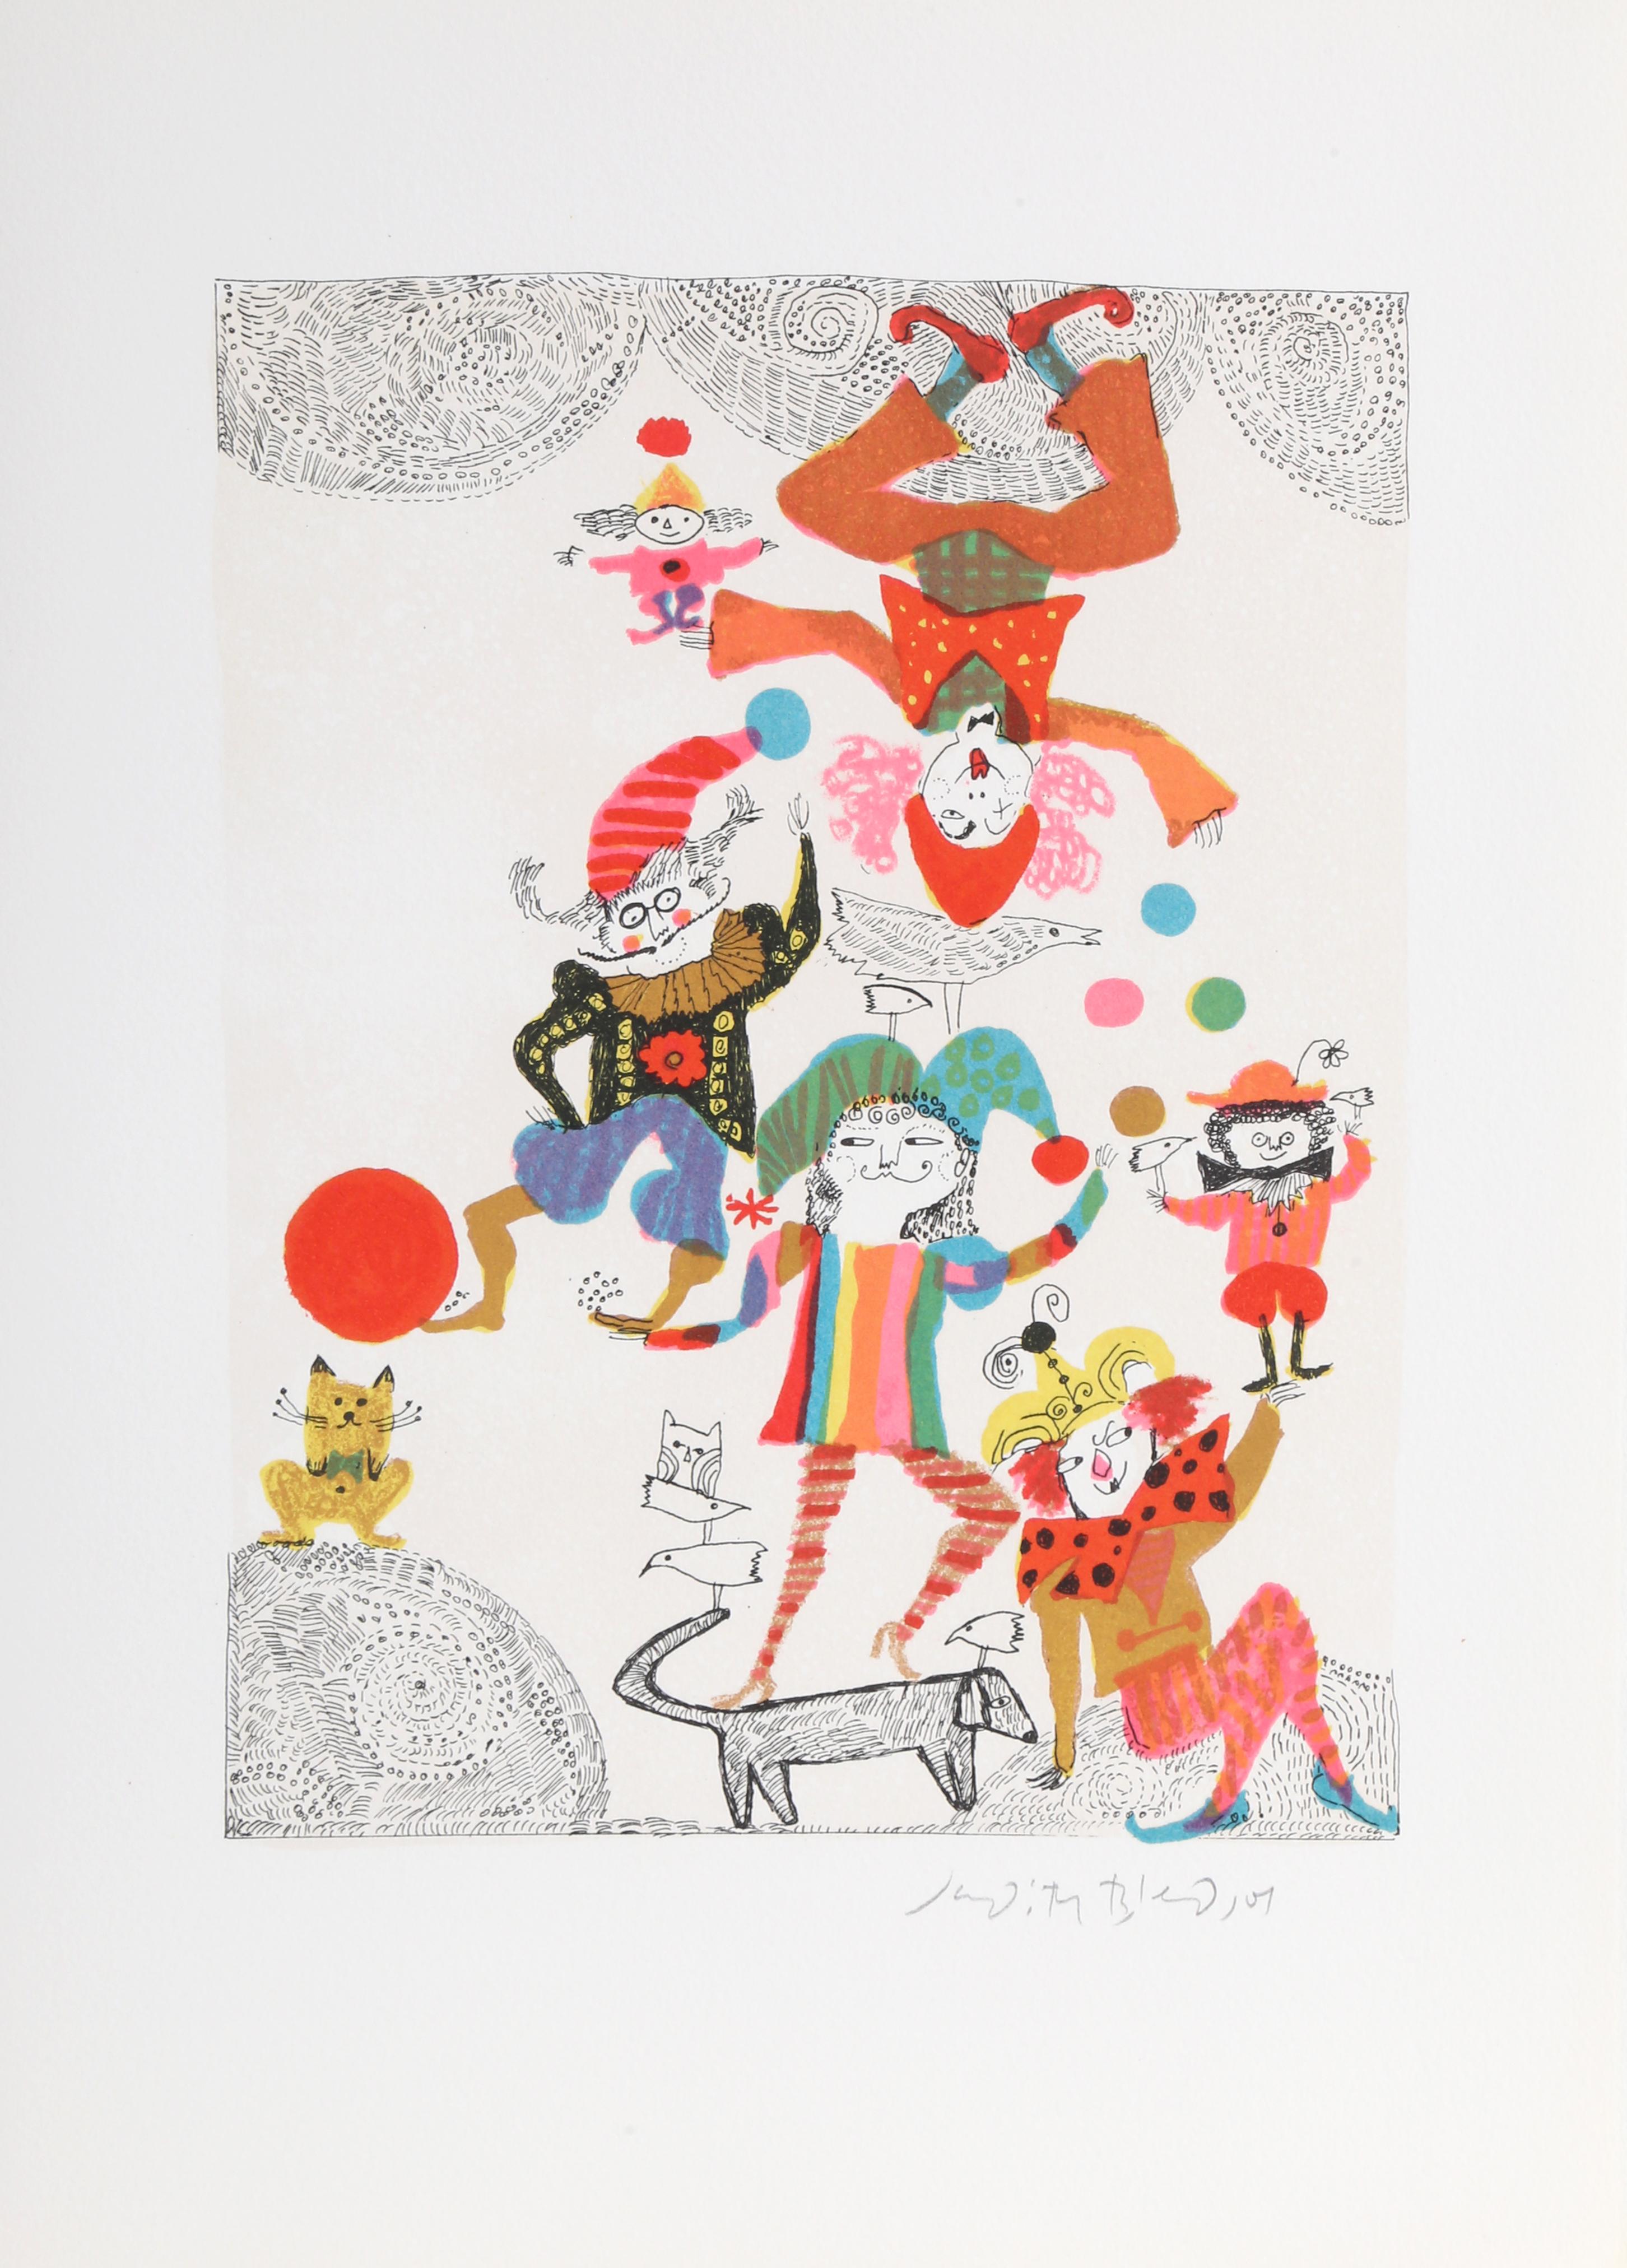 Judith Bledsoe, American (1938 - 2013) -  Juggling Clowns from A Little Circus. Year: 1974, Medium: Lithograph, signed in pencil, Edition: HC, Size: 15  x 10.5 in. (38.1  x 26.67 cm), Description: In this bustling print, Judith Bledsoe renders a